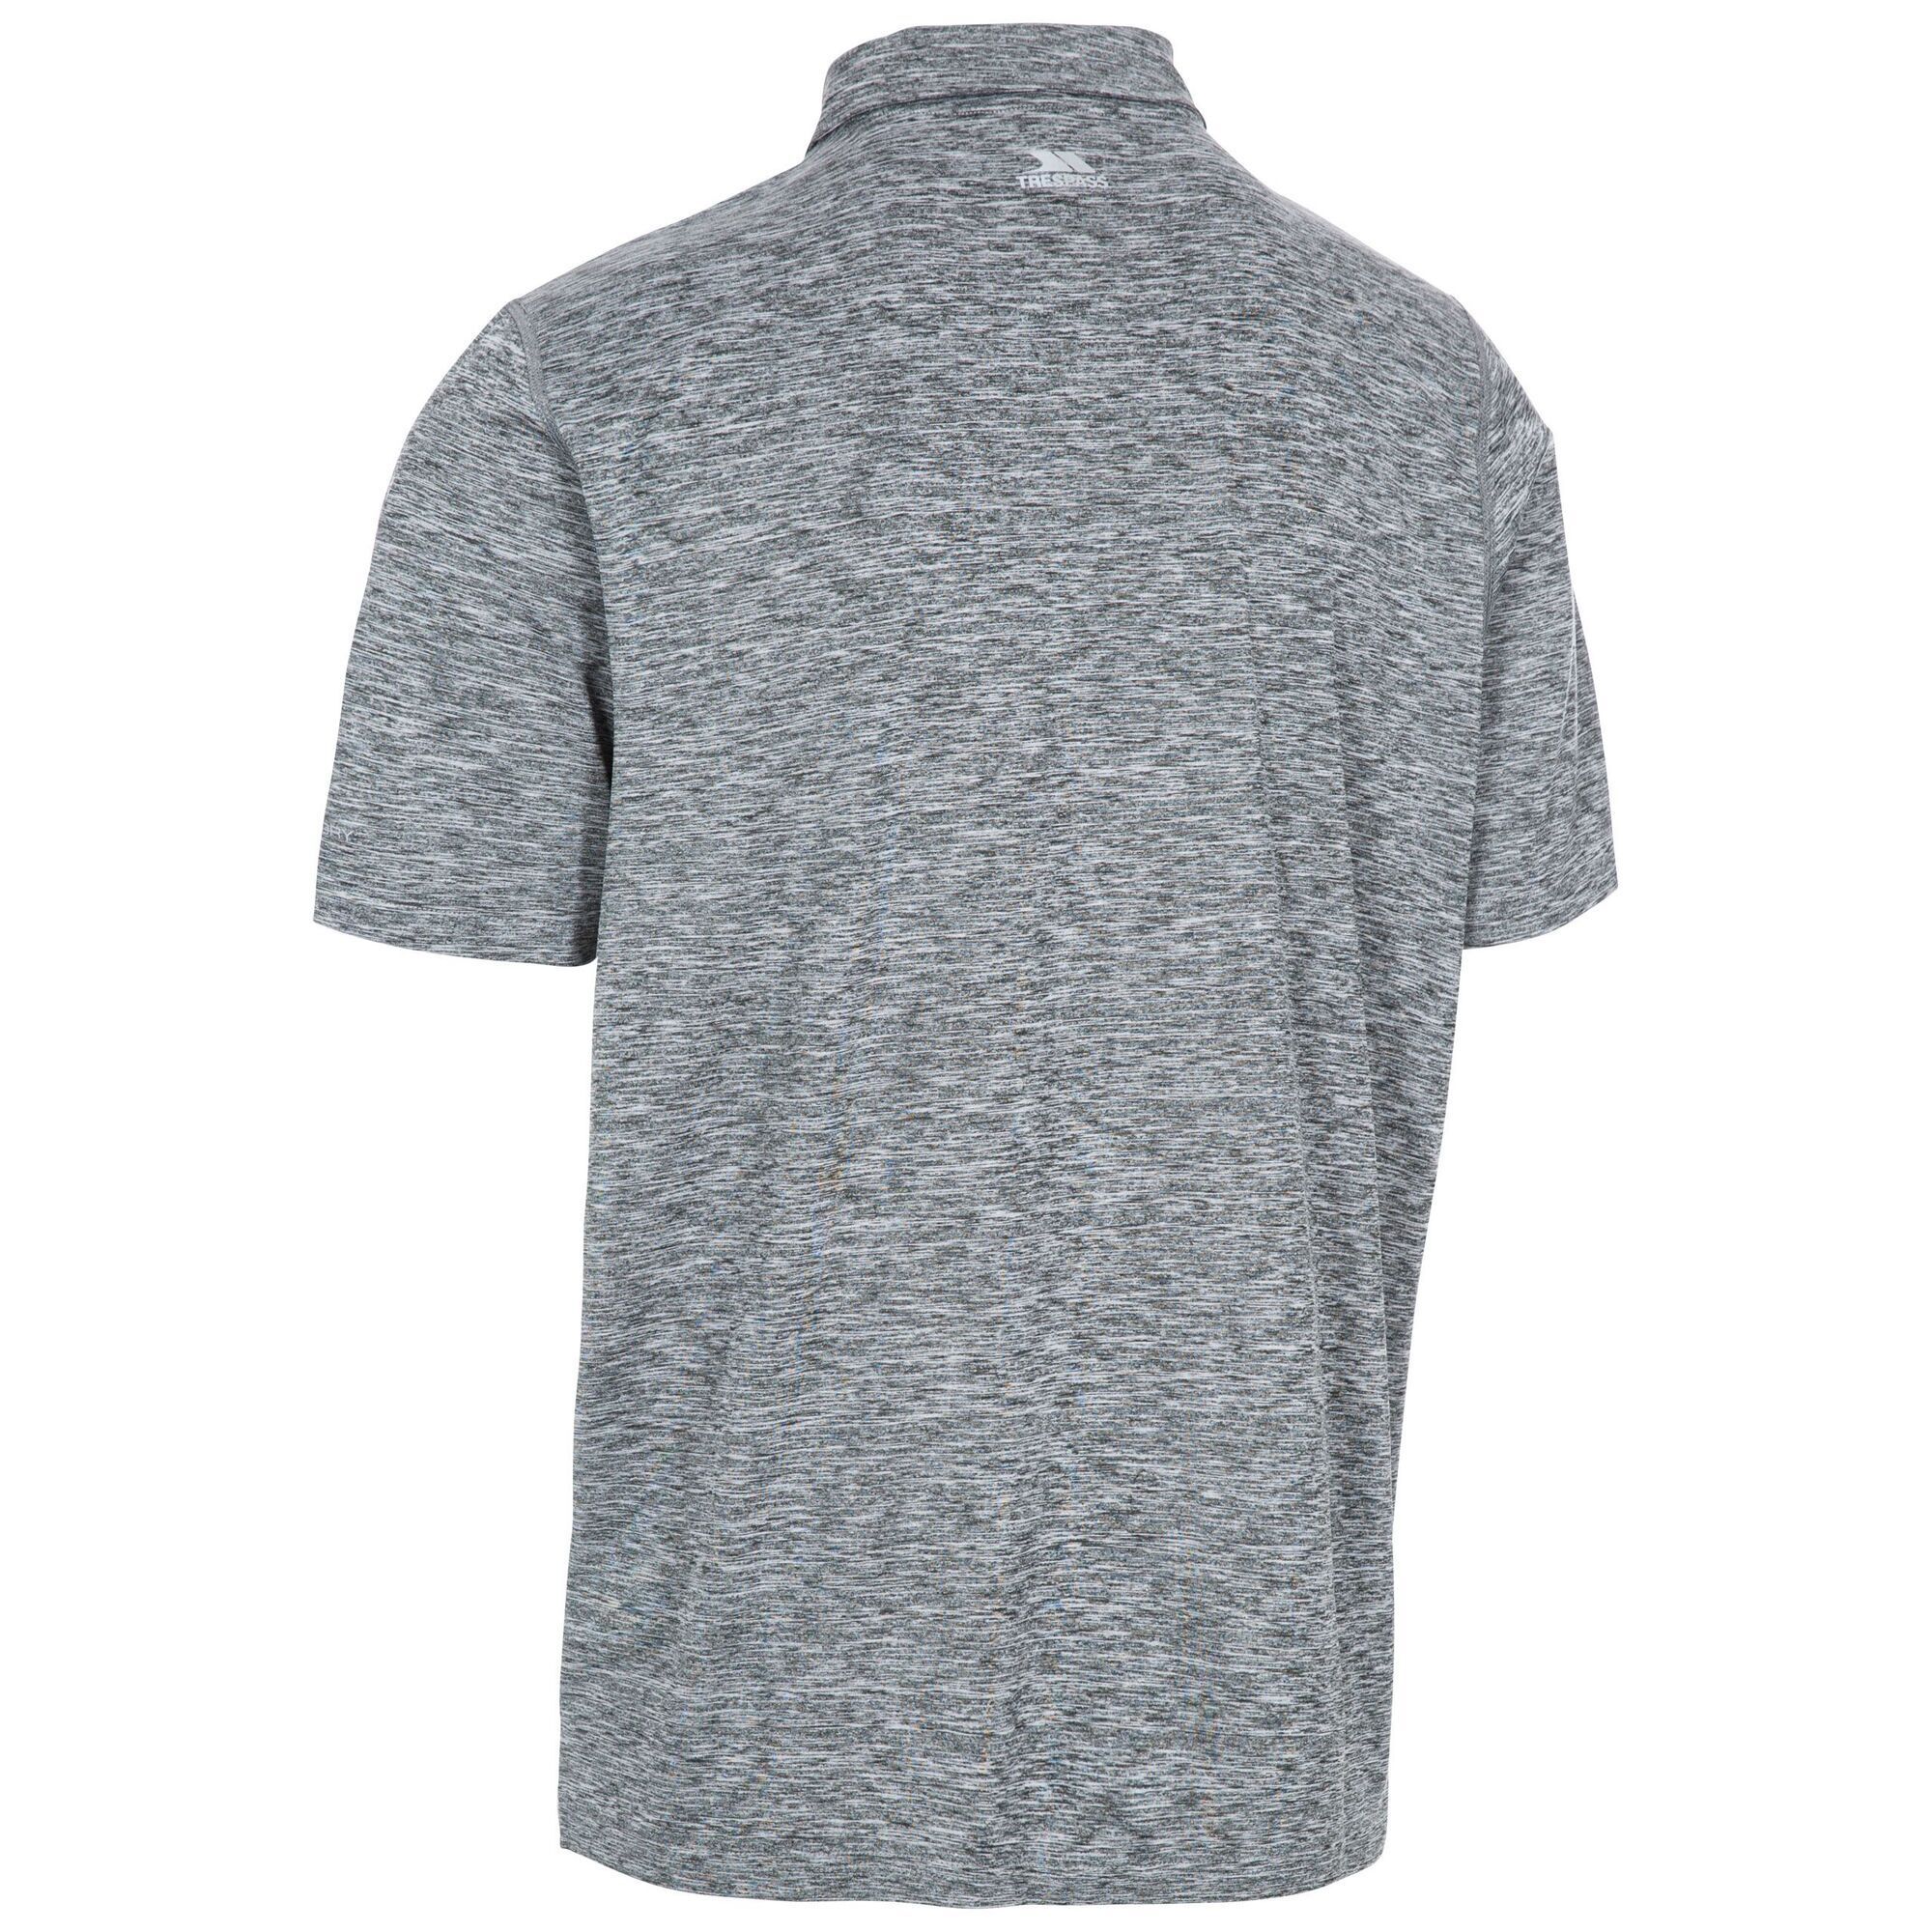 Marl fabric. Sweat wicking. Short sleeve. Button fastening.  Textured look. Material: 96% Polyester, 4% Elastane.